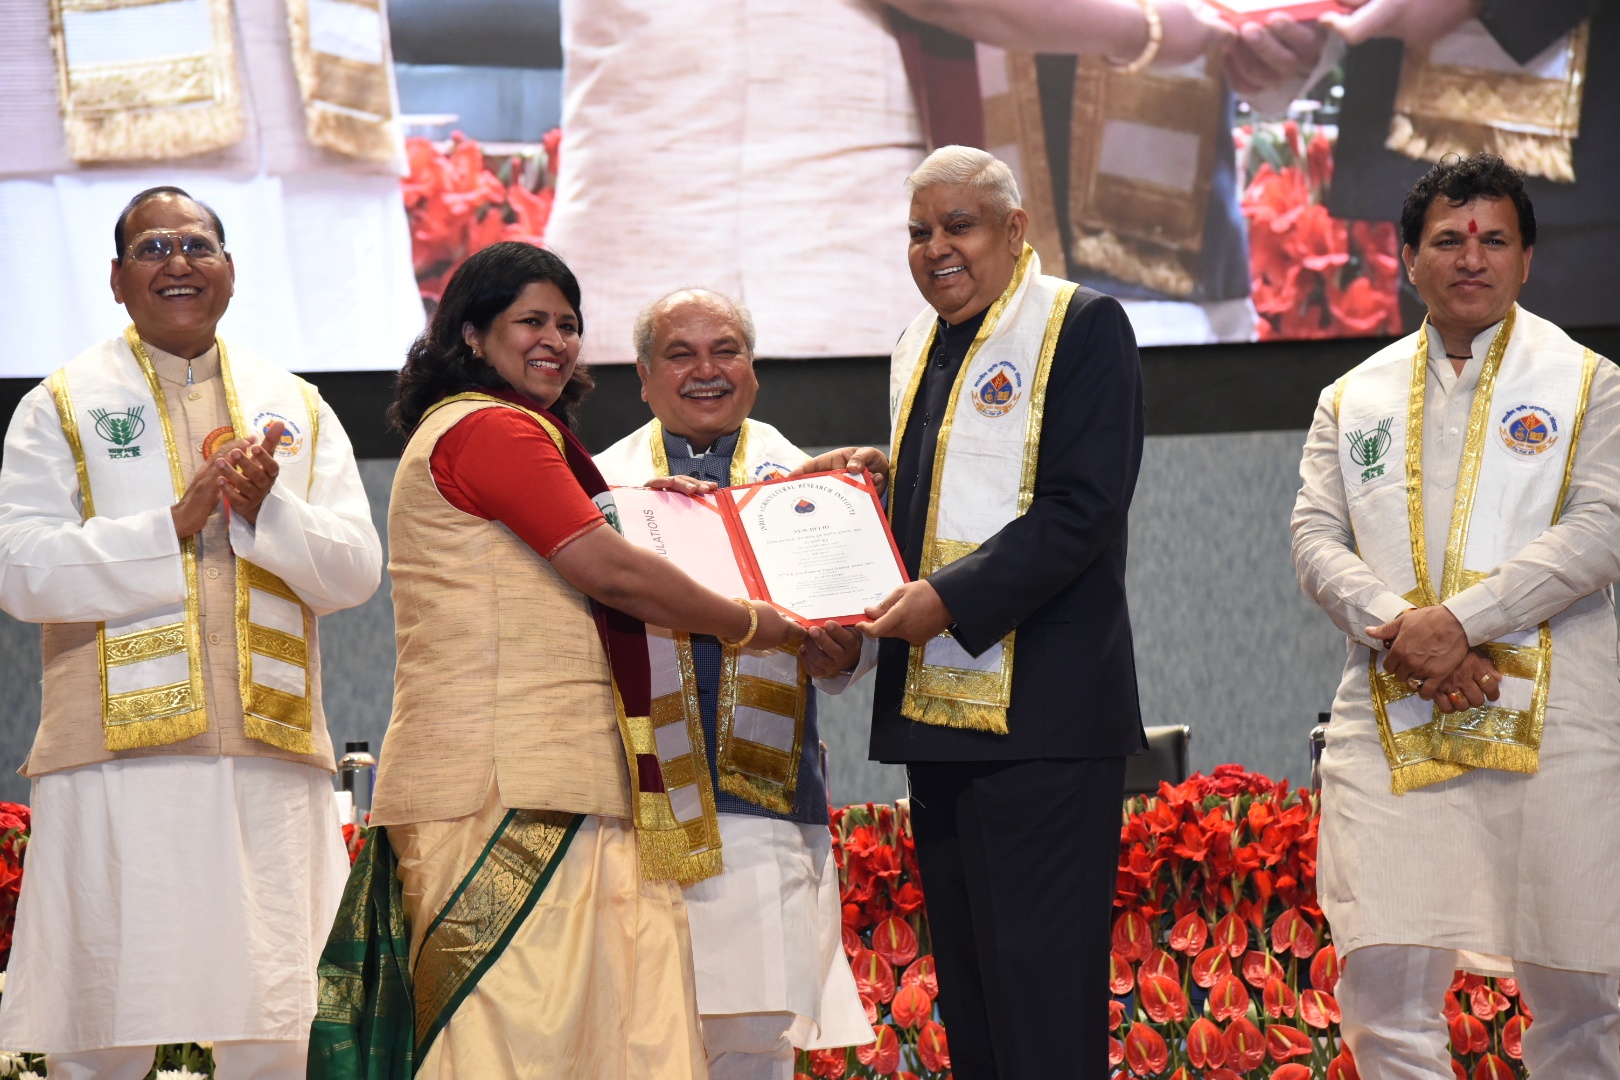 Hon'ble Vice President, Shri Jagdeep Dhankhar presented the medals and awards to the meritorious students of MSc and PhD at the 61st convocation ceremony of ICAR-Indian Agricultural Research Institute on February 24, 2023.